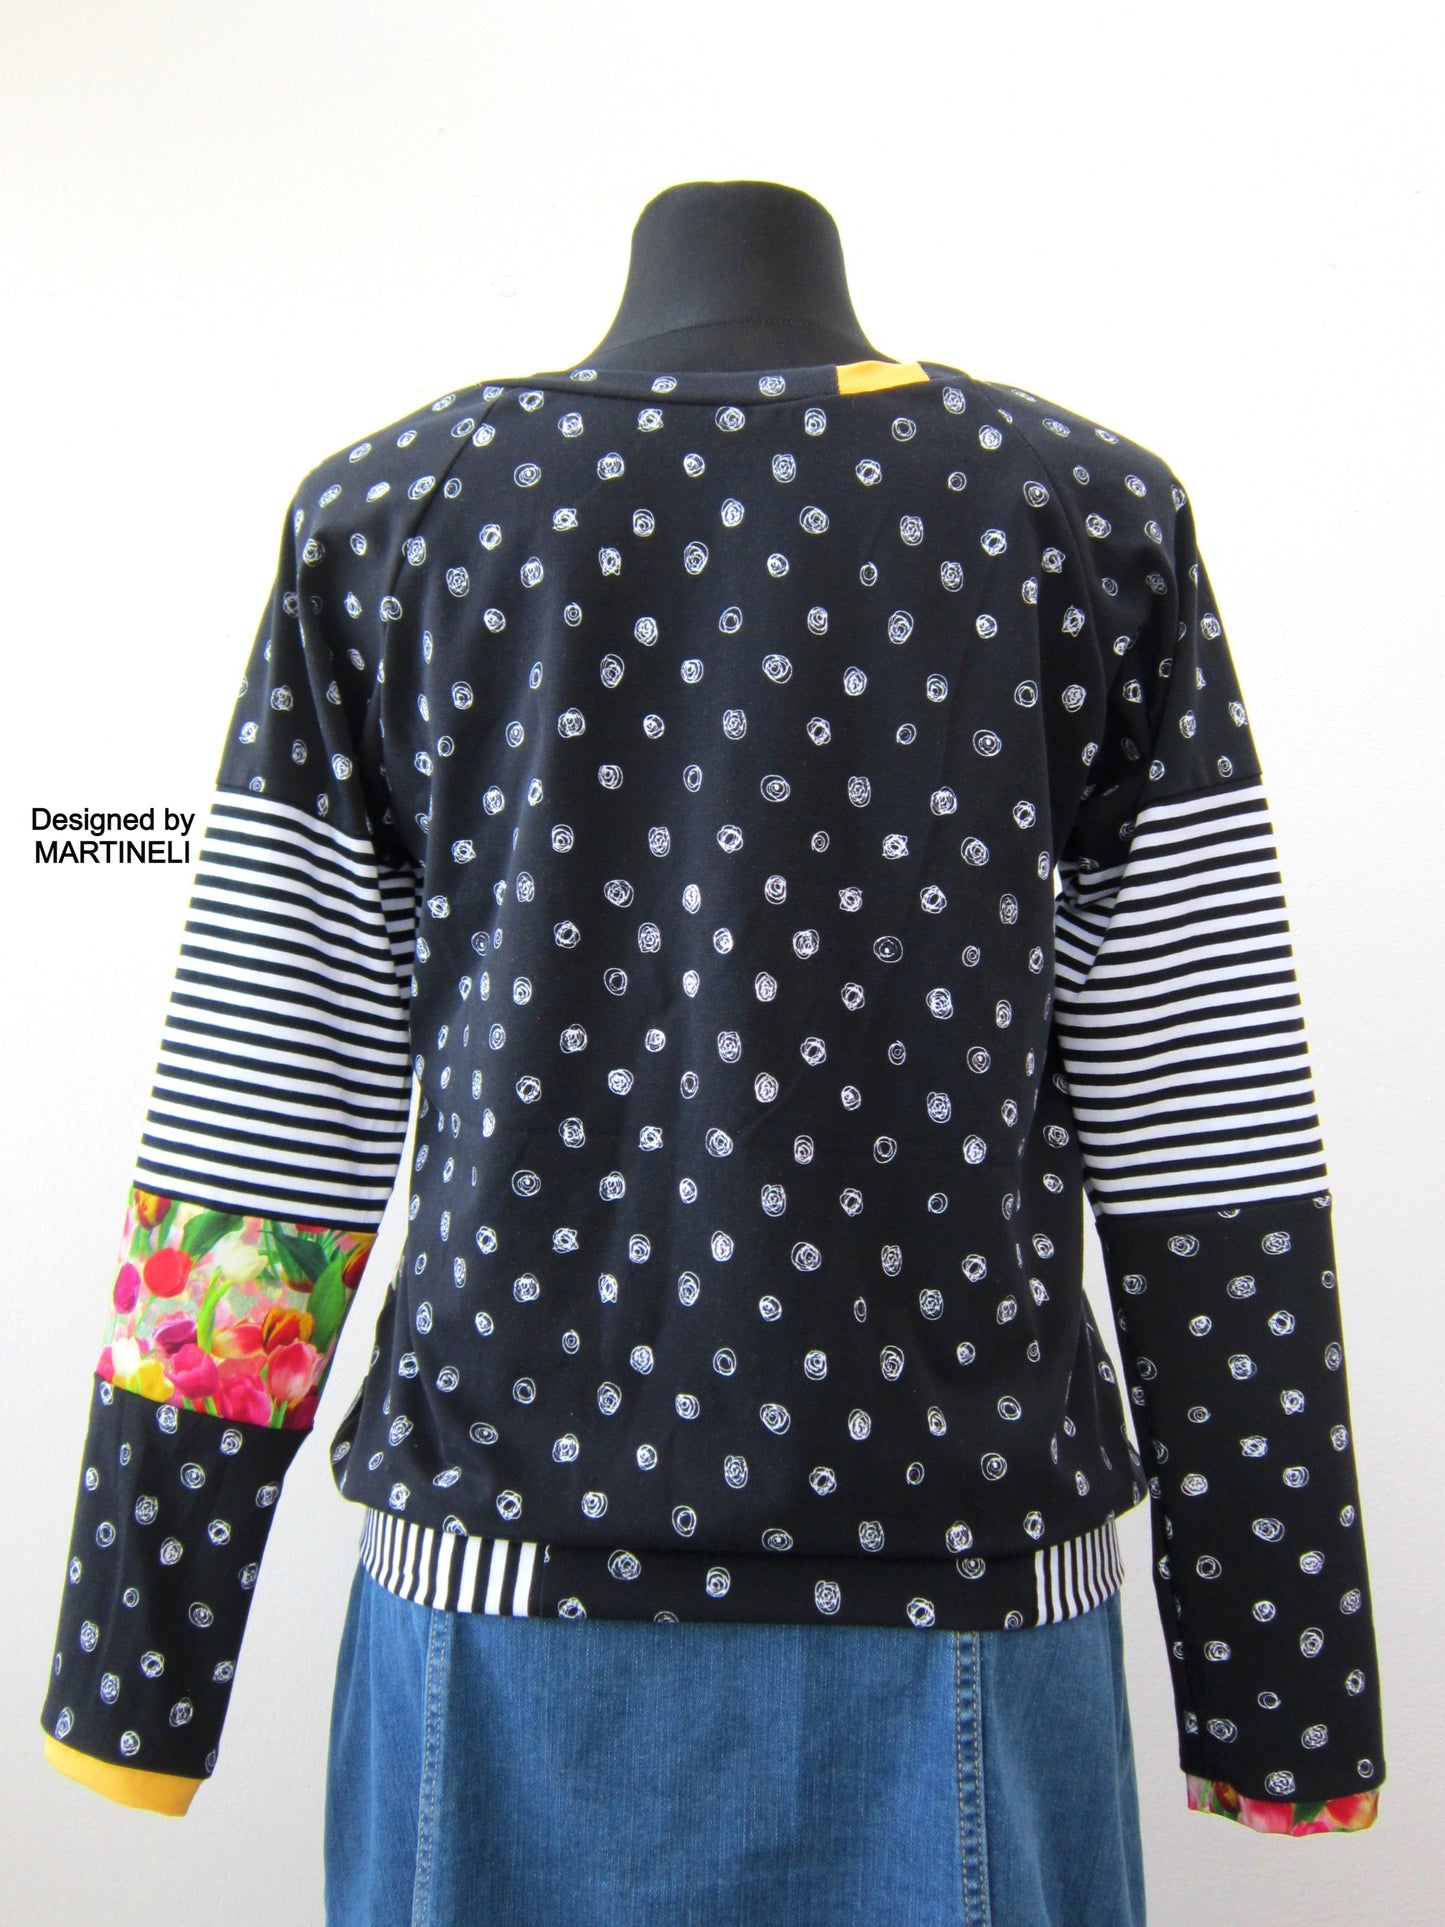 Long Sleeves T-Shirt Top for Women,M Striped Cotton Top